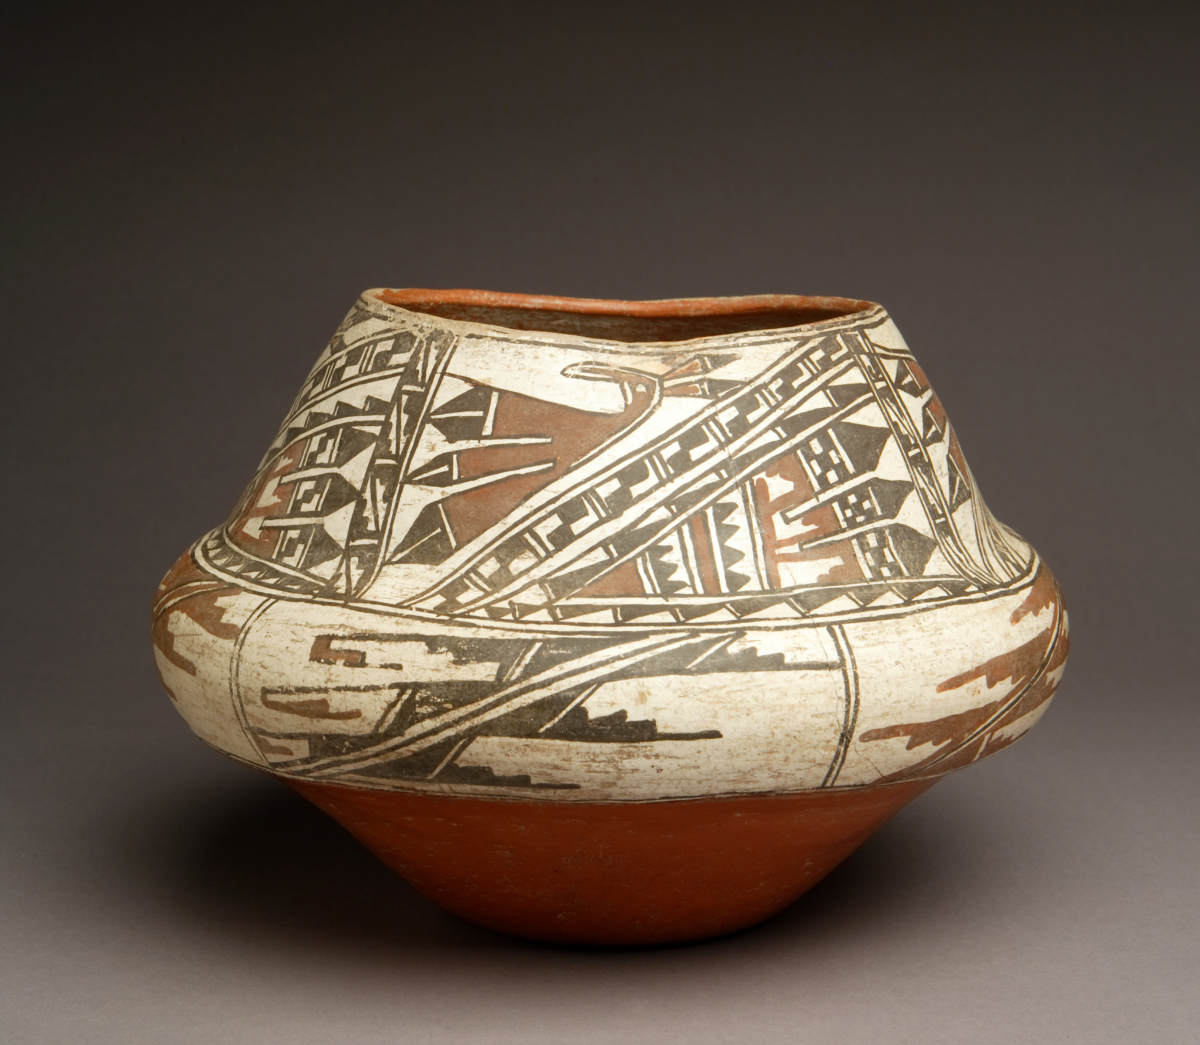 Zuni Pot from IARC Collections